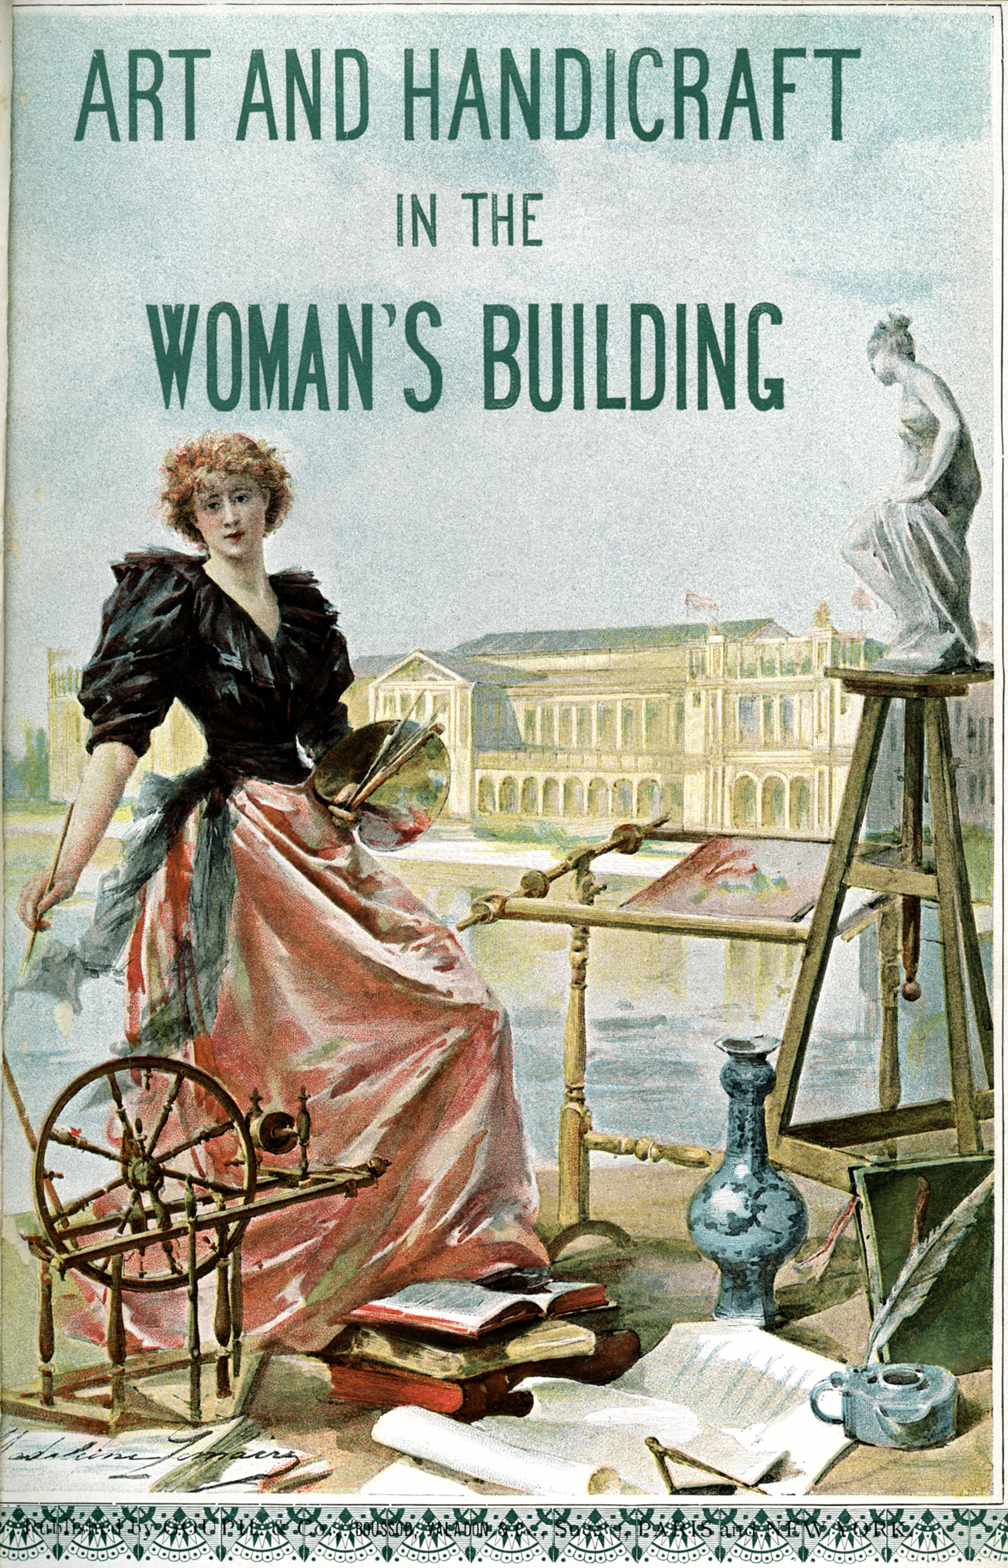 Poster from the Woman's BUilding at Chicago World's Fair, 1893